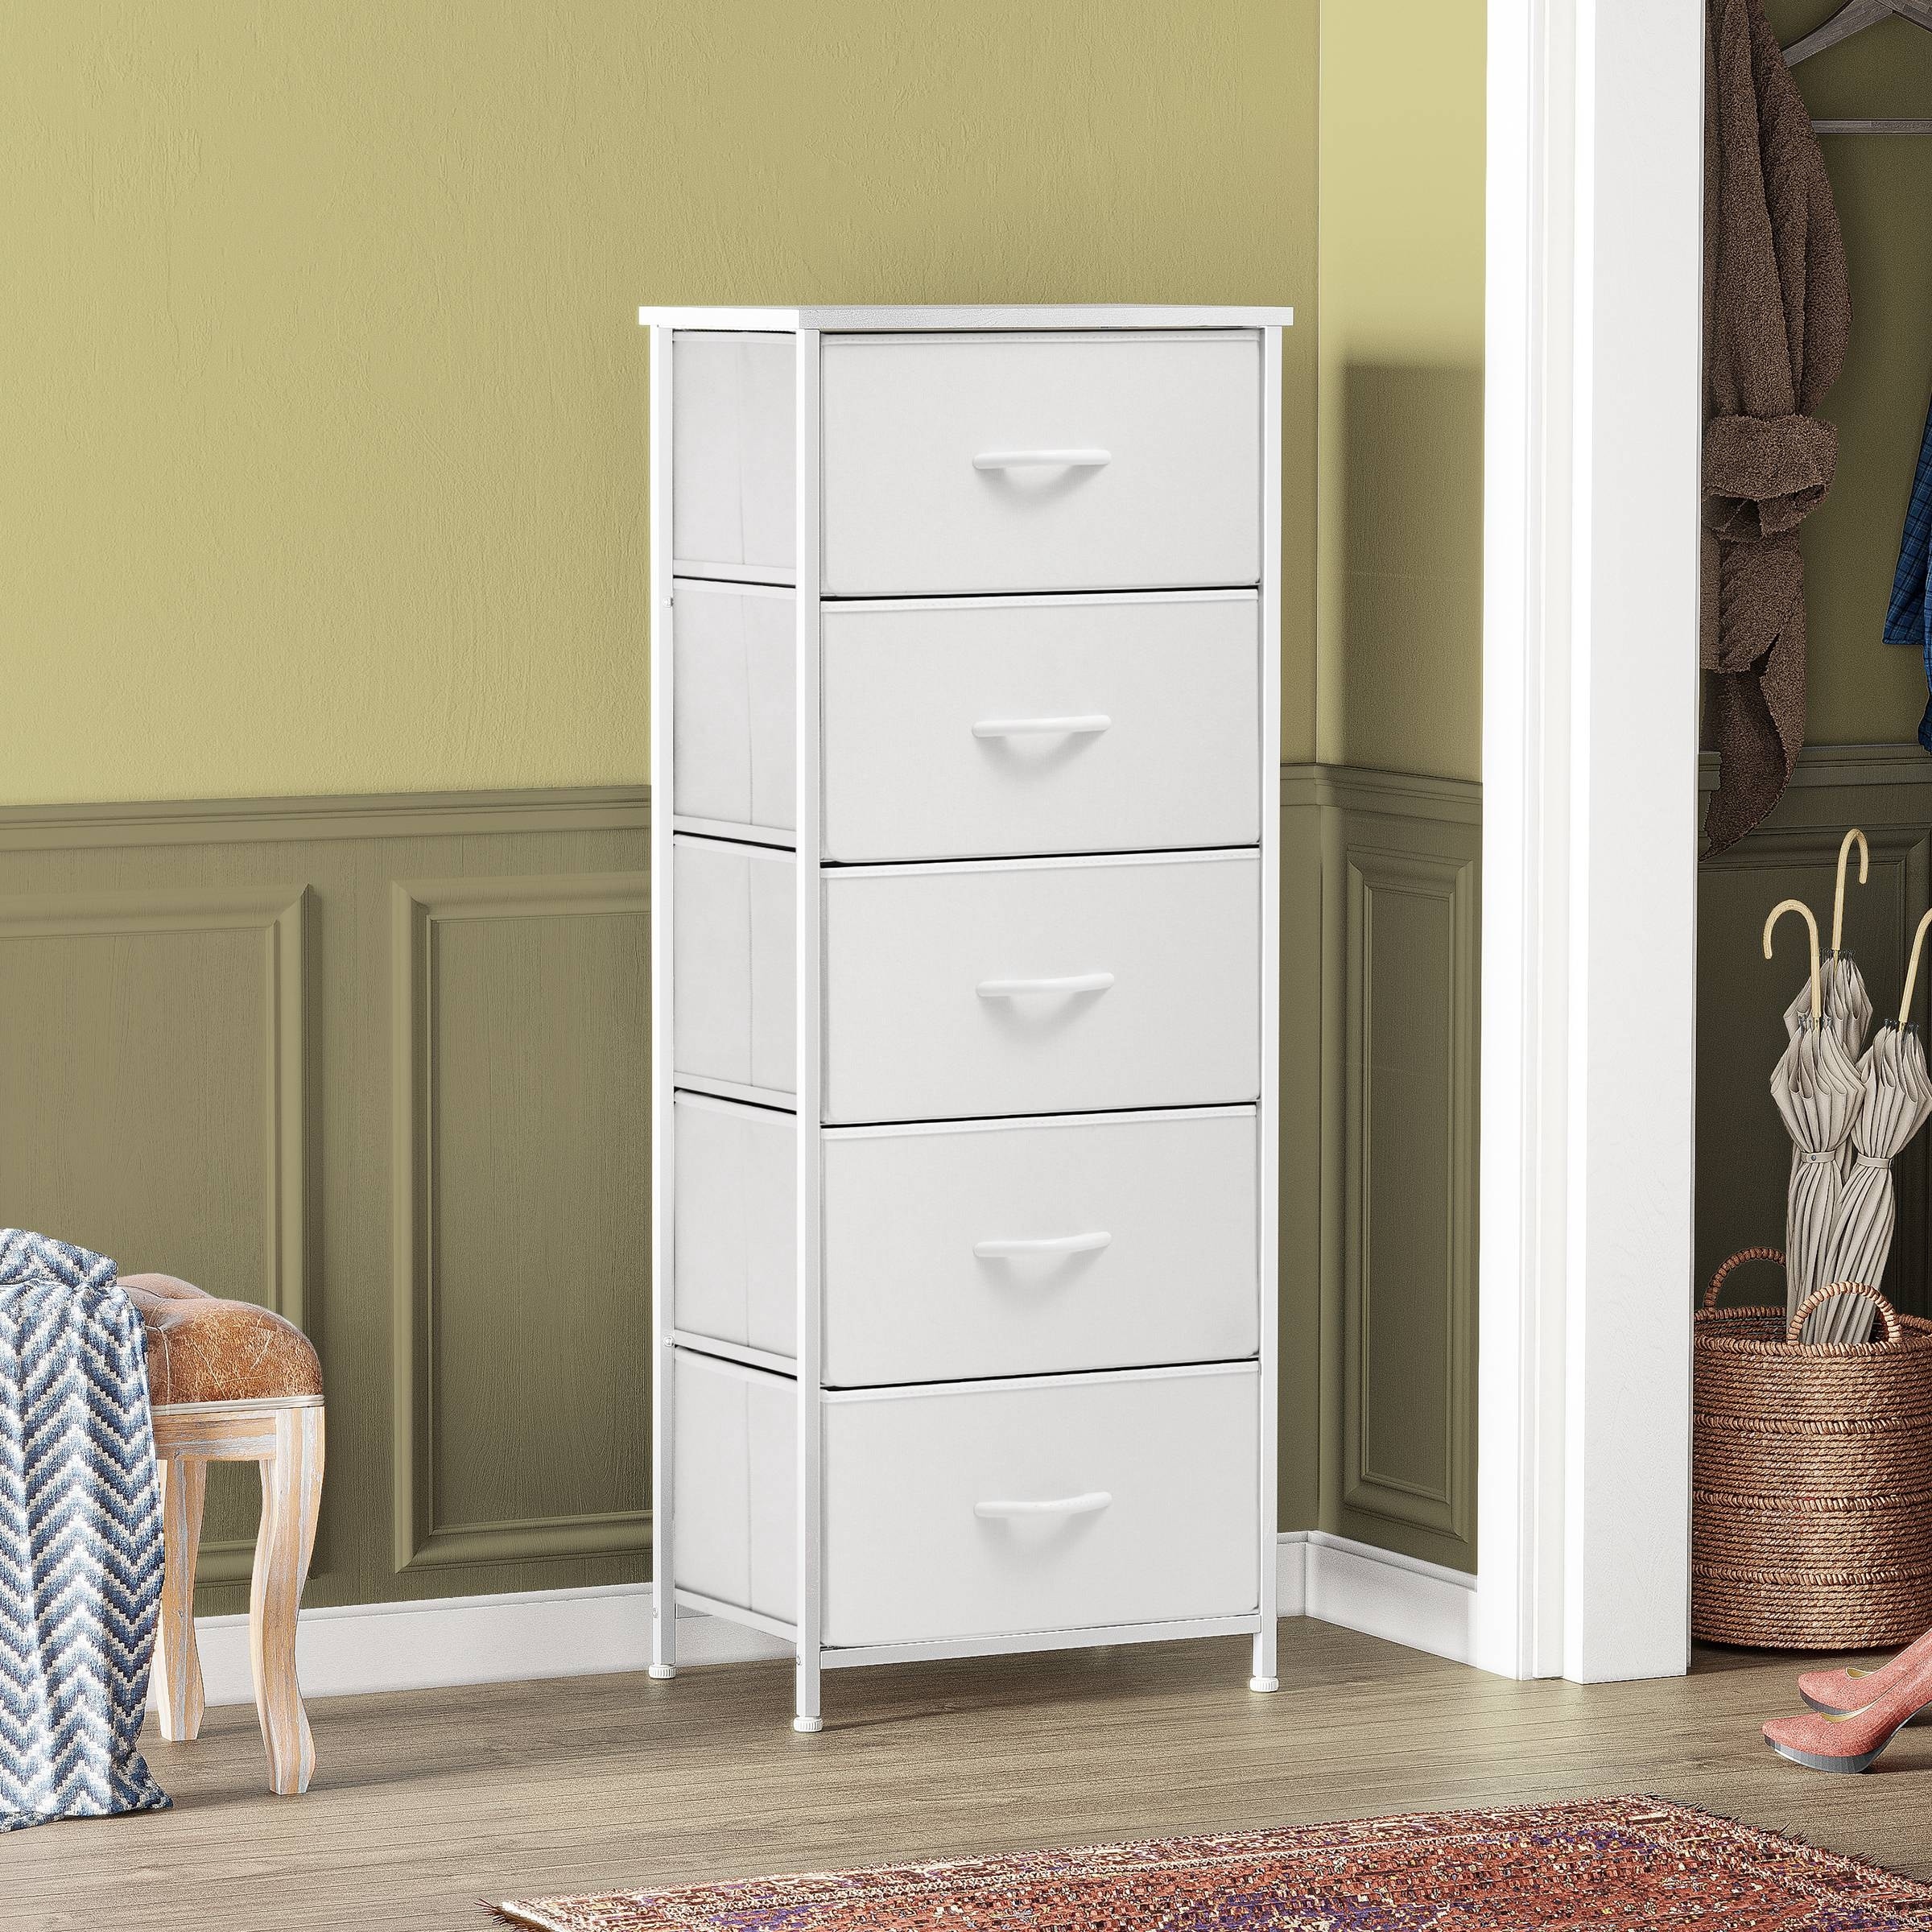 https://ak1.ostkcdn.com/images/products/is/images/direct/57a596bc3a53d2da27252951ff8bb0490857d2c7/VredHom-5-Drawers-Vertical-Dresser-Storage-Tower.jpg